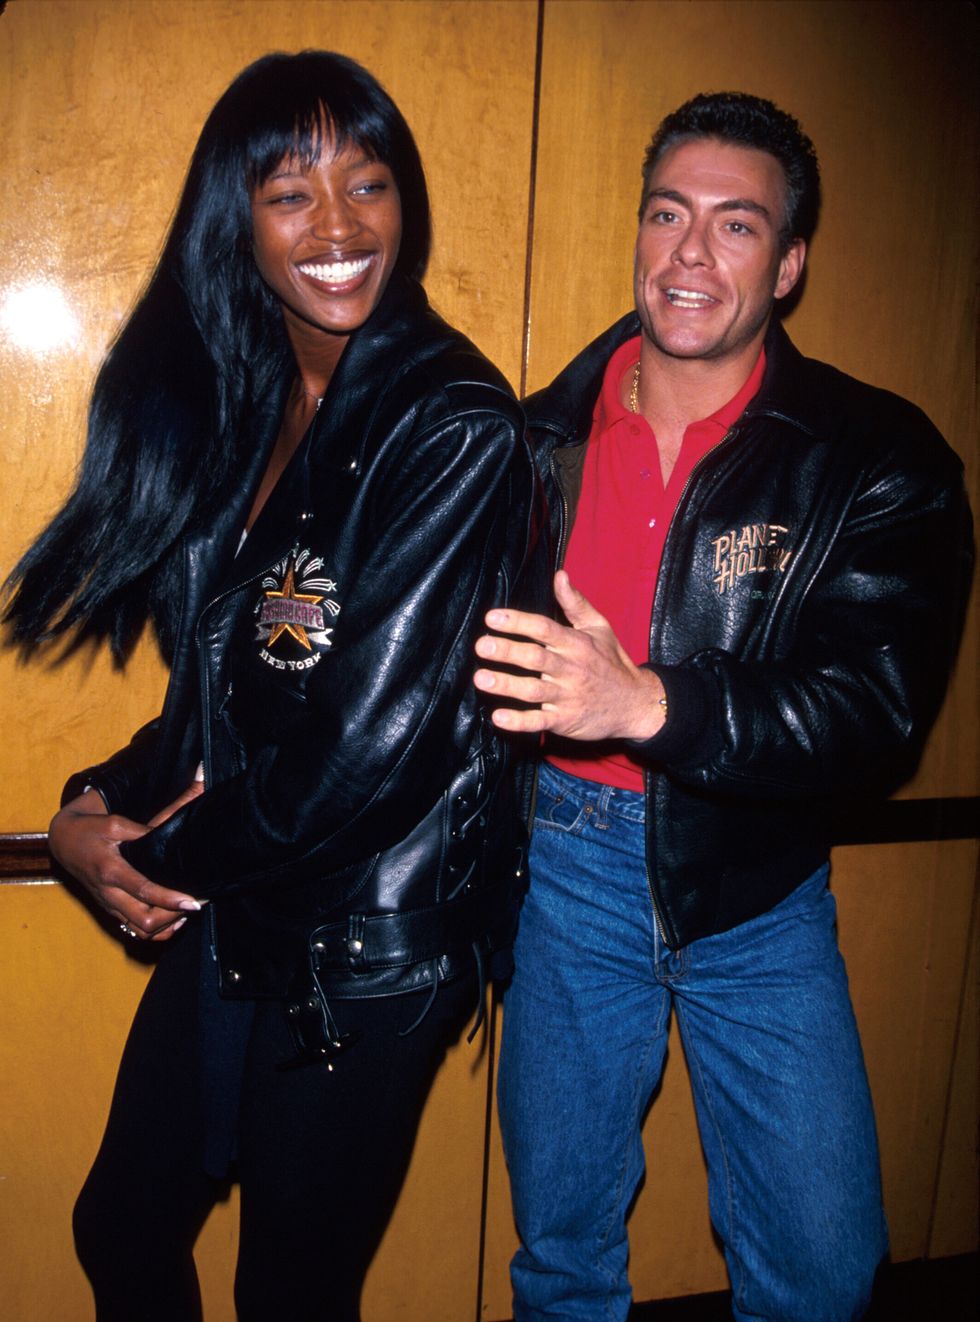 fashion model naomi campbell with actor jean claude van damme at planet hollywood  photo by dave alloccadmithe life picture collection via getty images